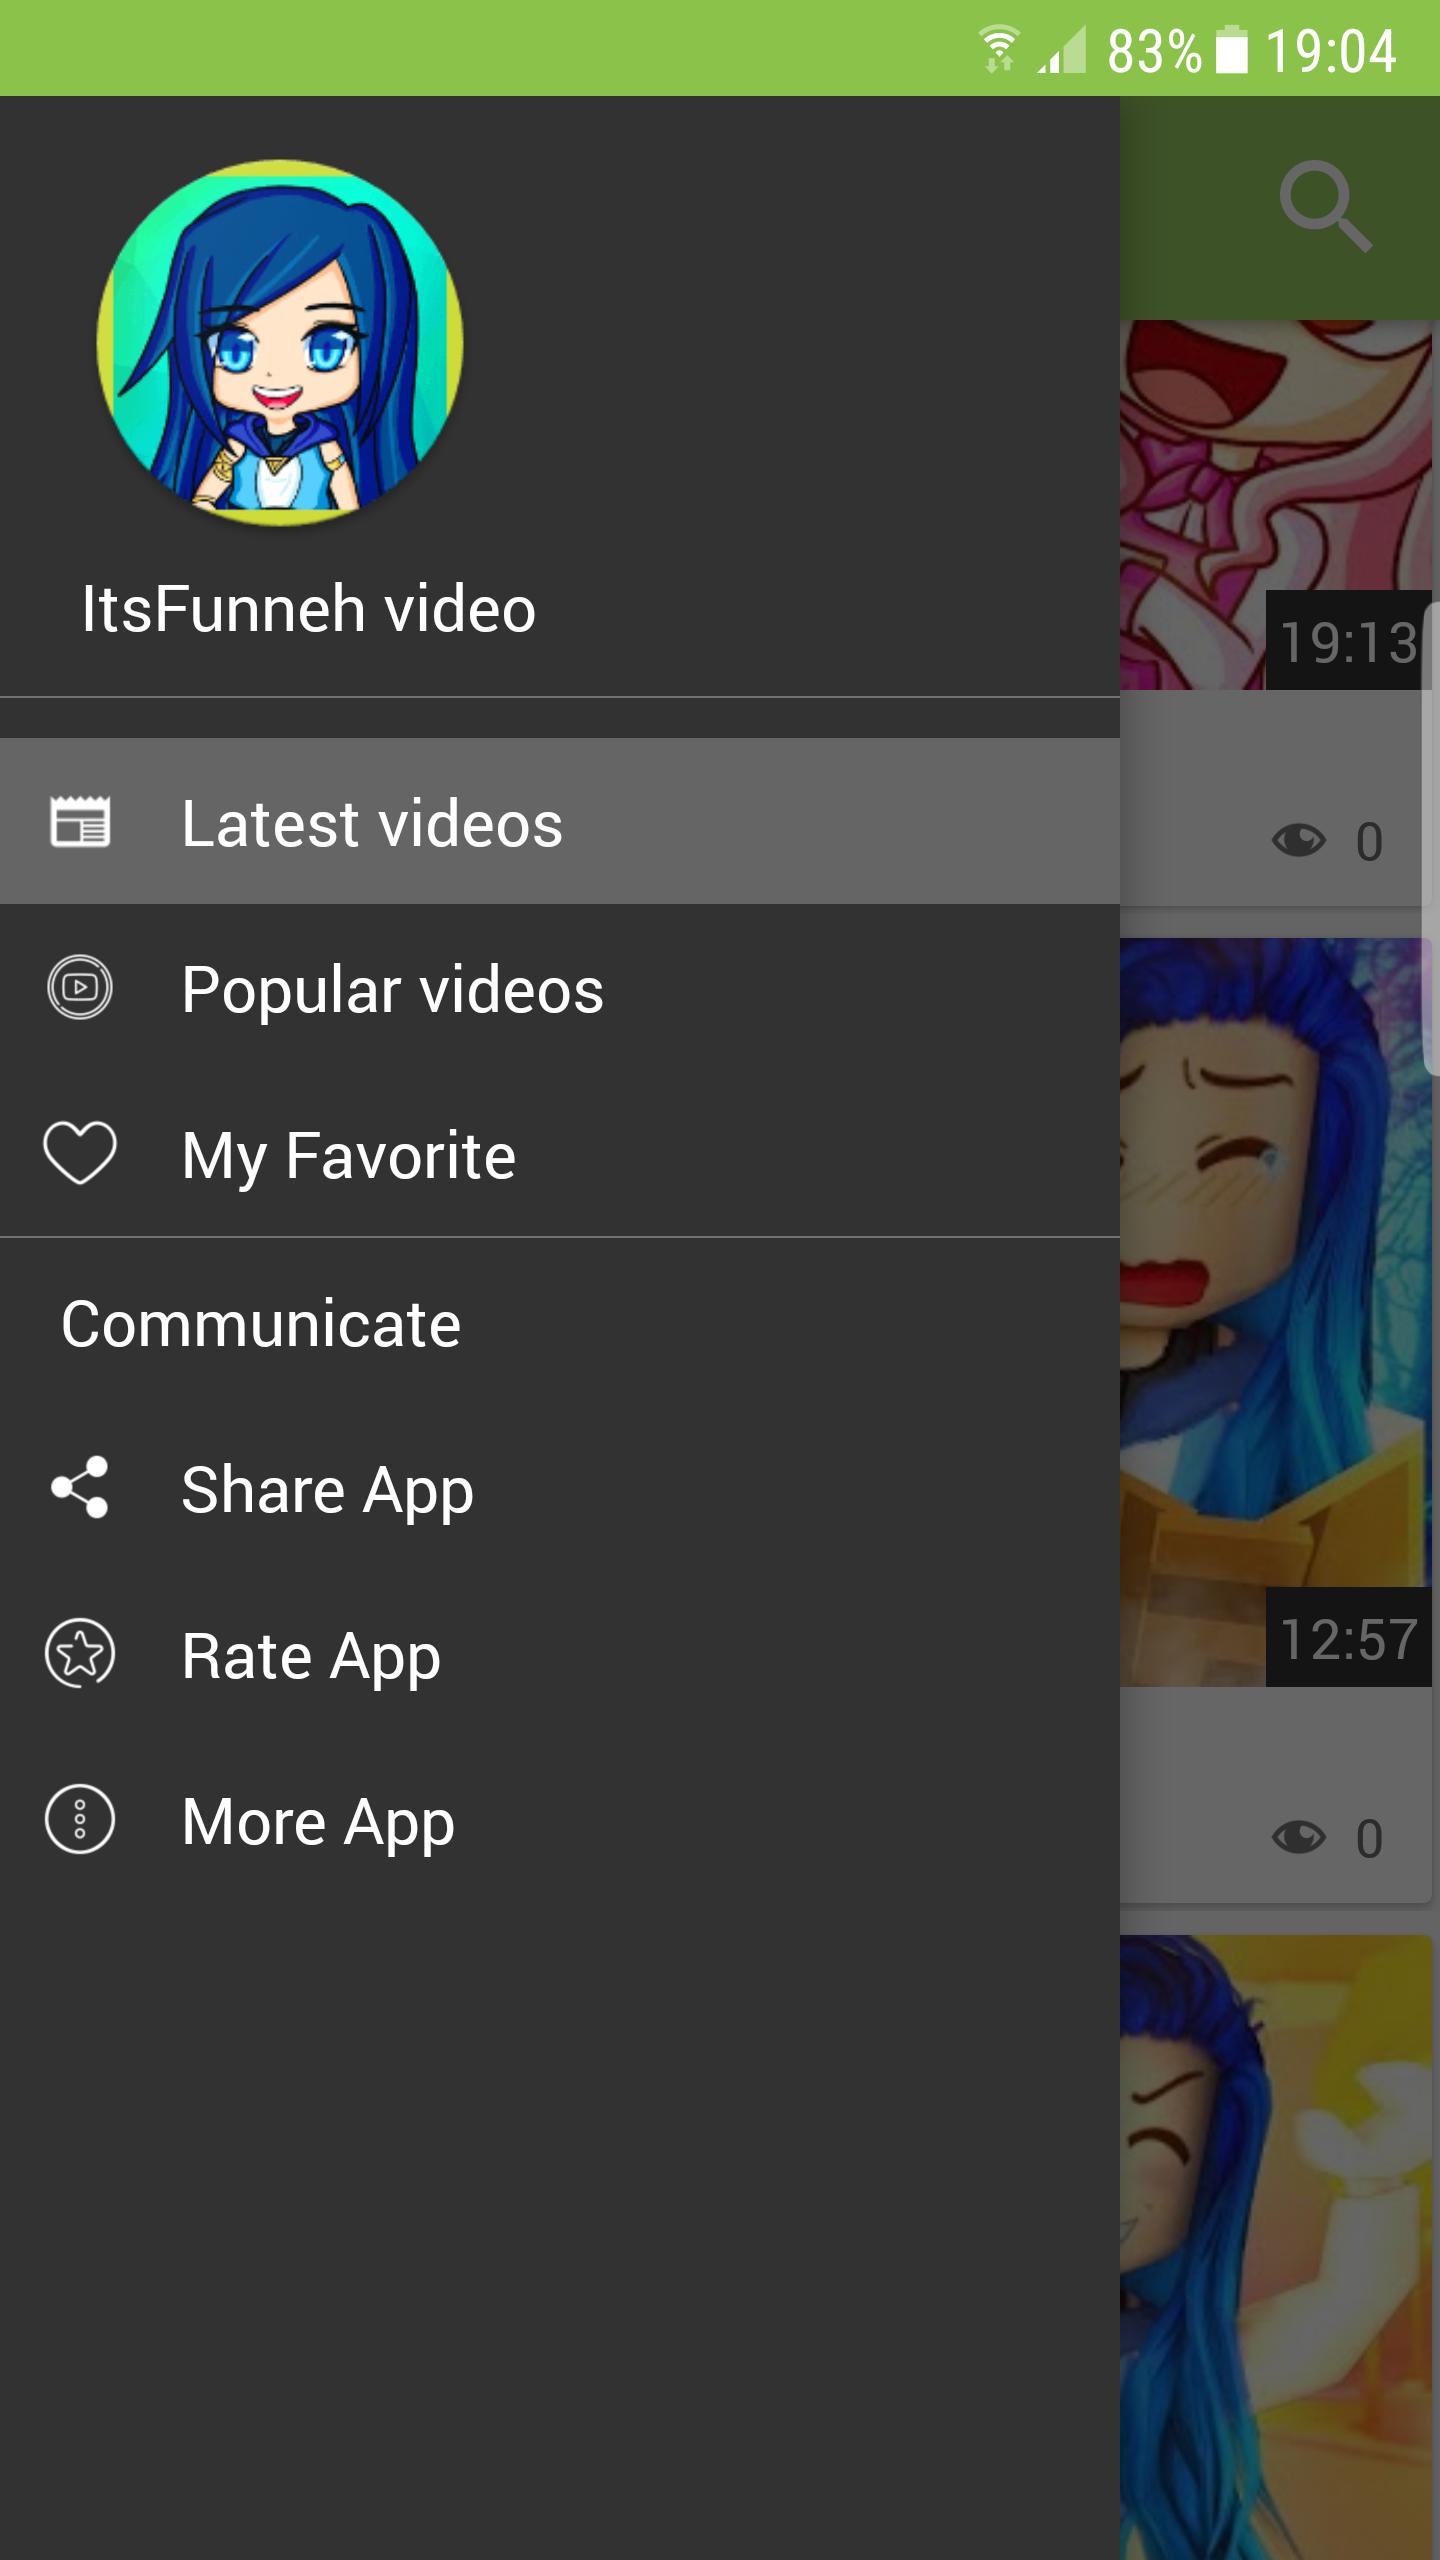 Itsfunneh Roblox Video For Android Apk Download - roblox itsfunneh new video